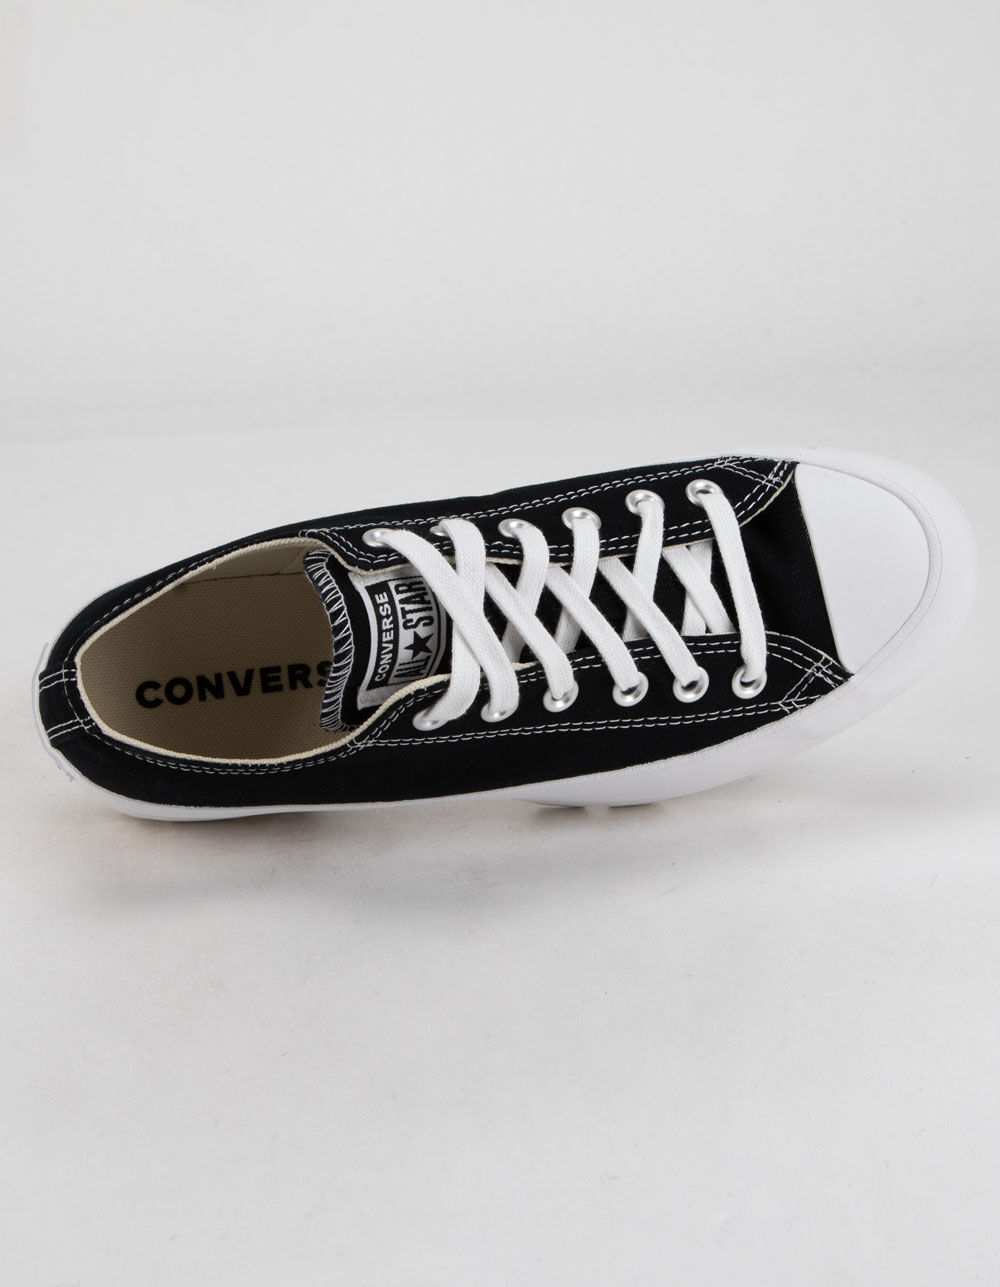 CONVERSE Lugged Canvas Chuck Taylor All Star Womens Low Top Shoes ...